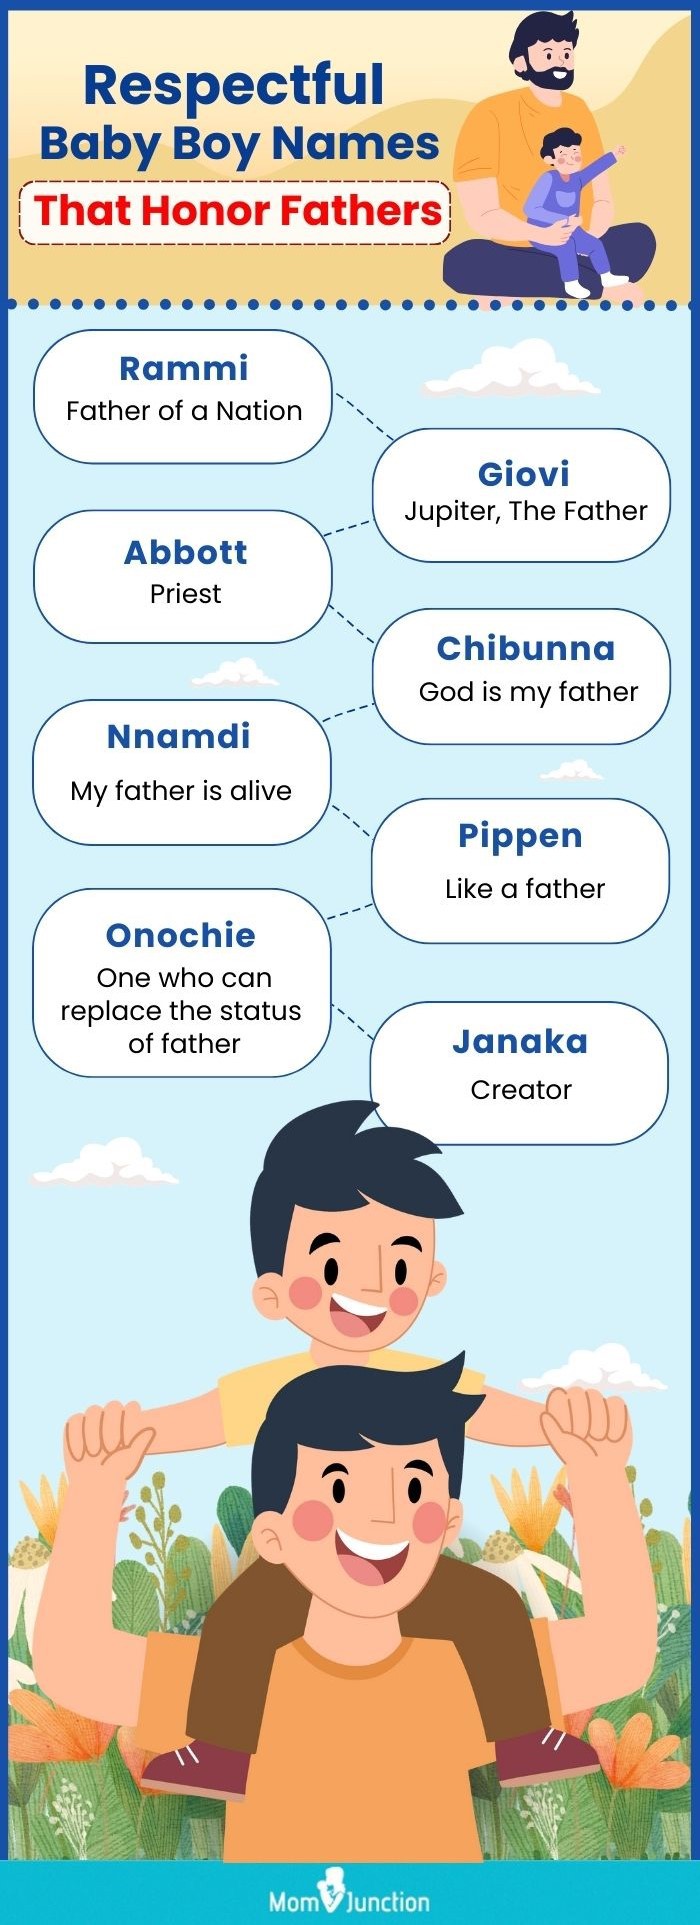 respectful baby boy names that honor fathers (infographic)